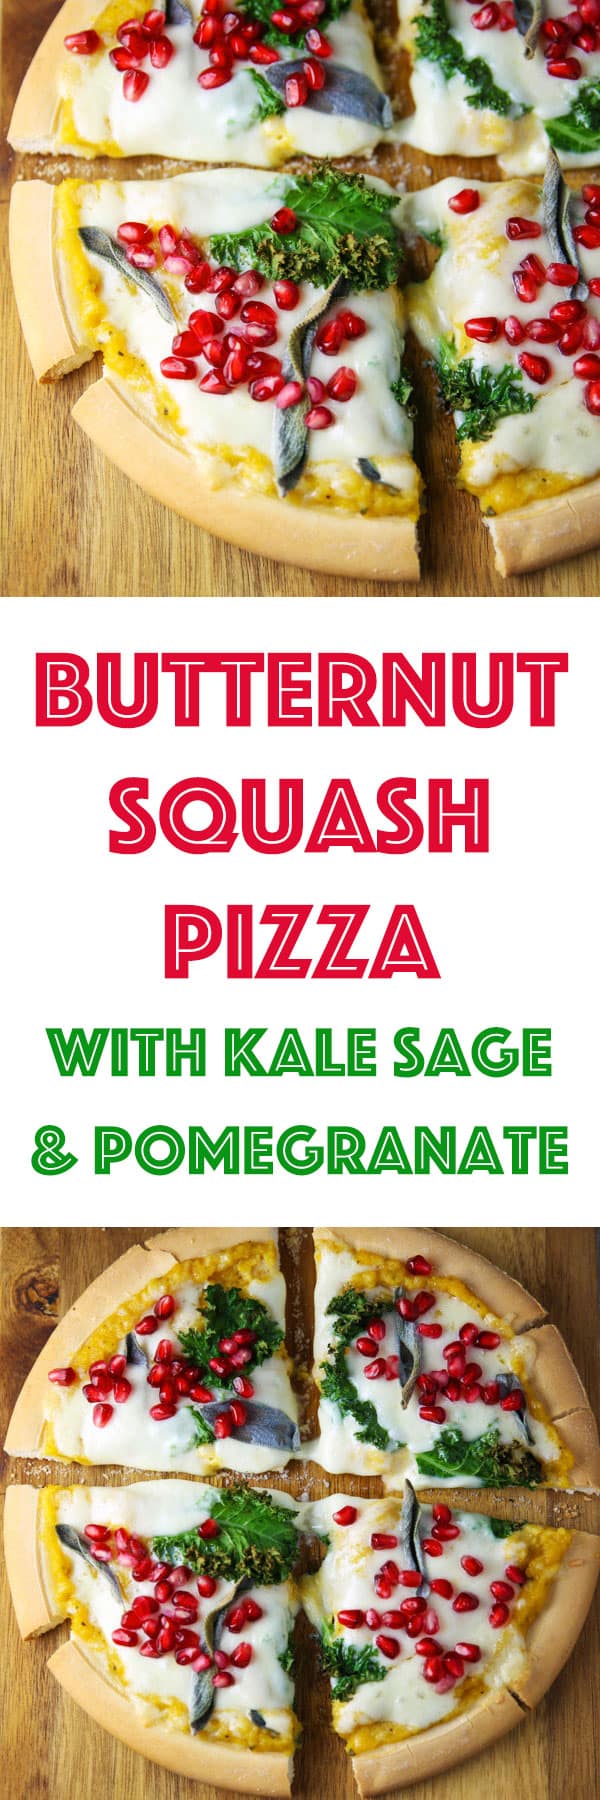 This Butternut Squash Pizza with Kale Sage and Pomegranate is so cheesy, savory, and 100% Delicious! #glutenfree